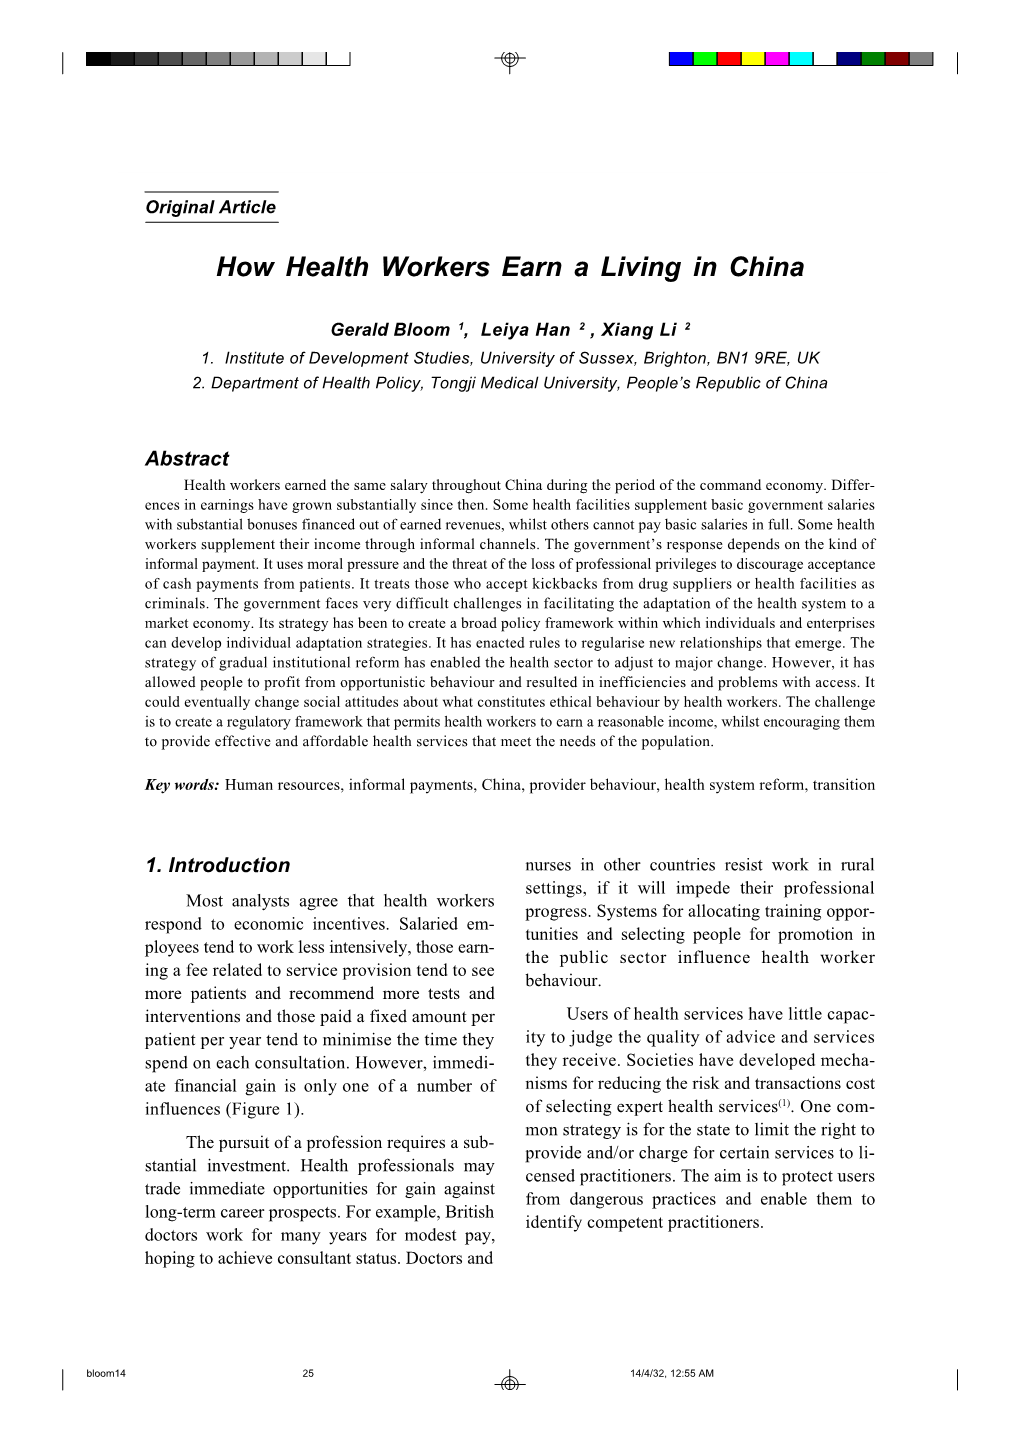 How Health Workers Earn a Living in China 25